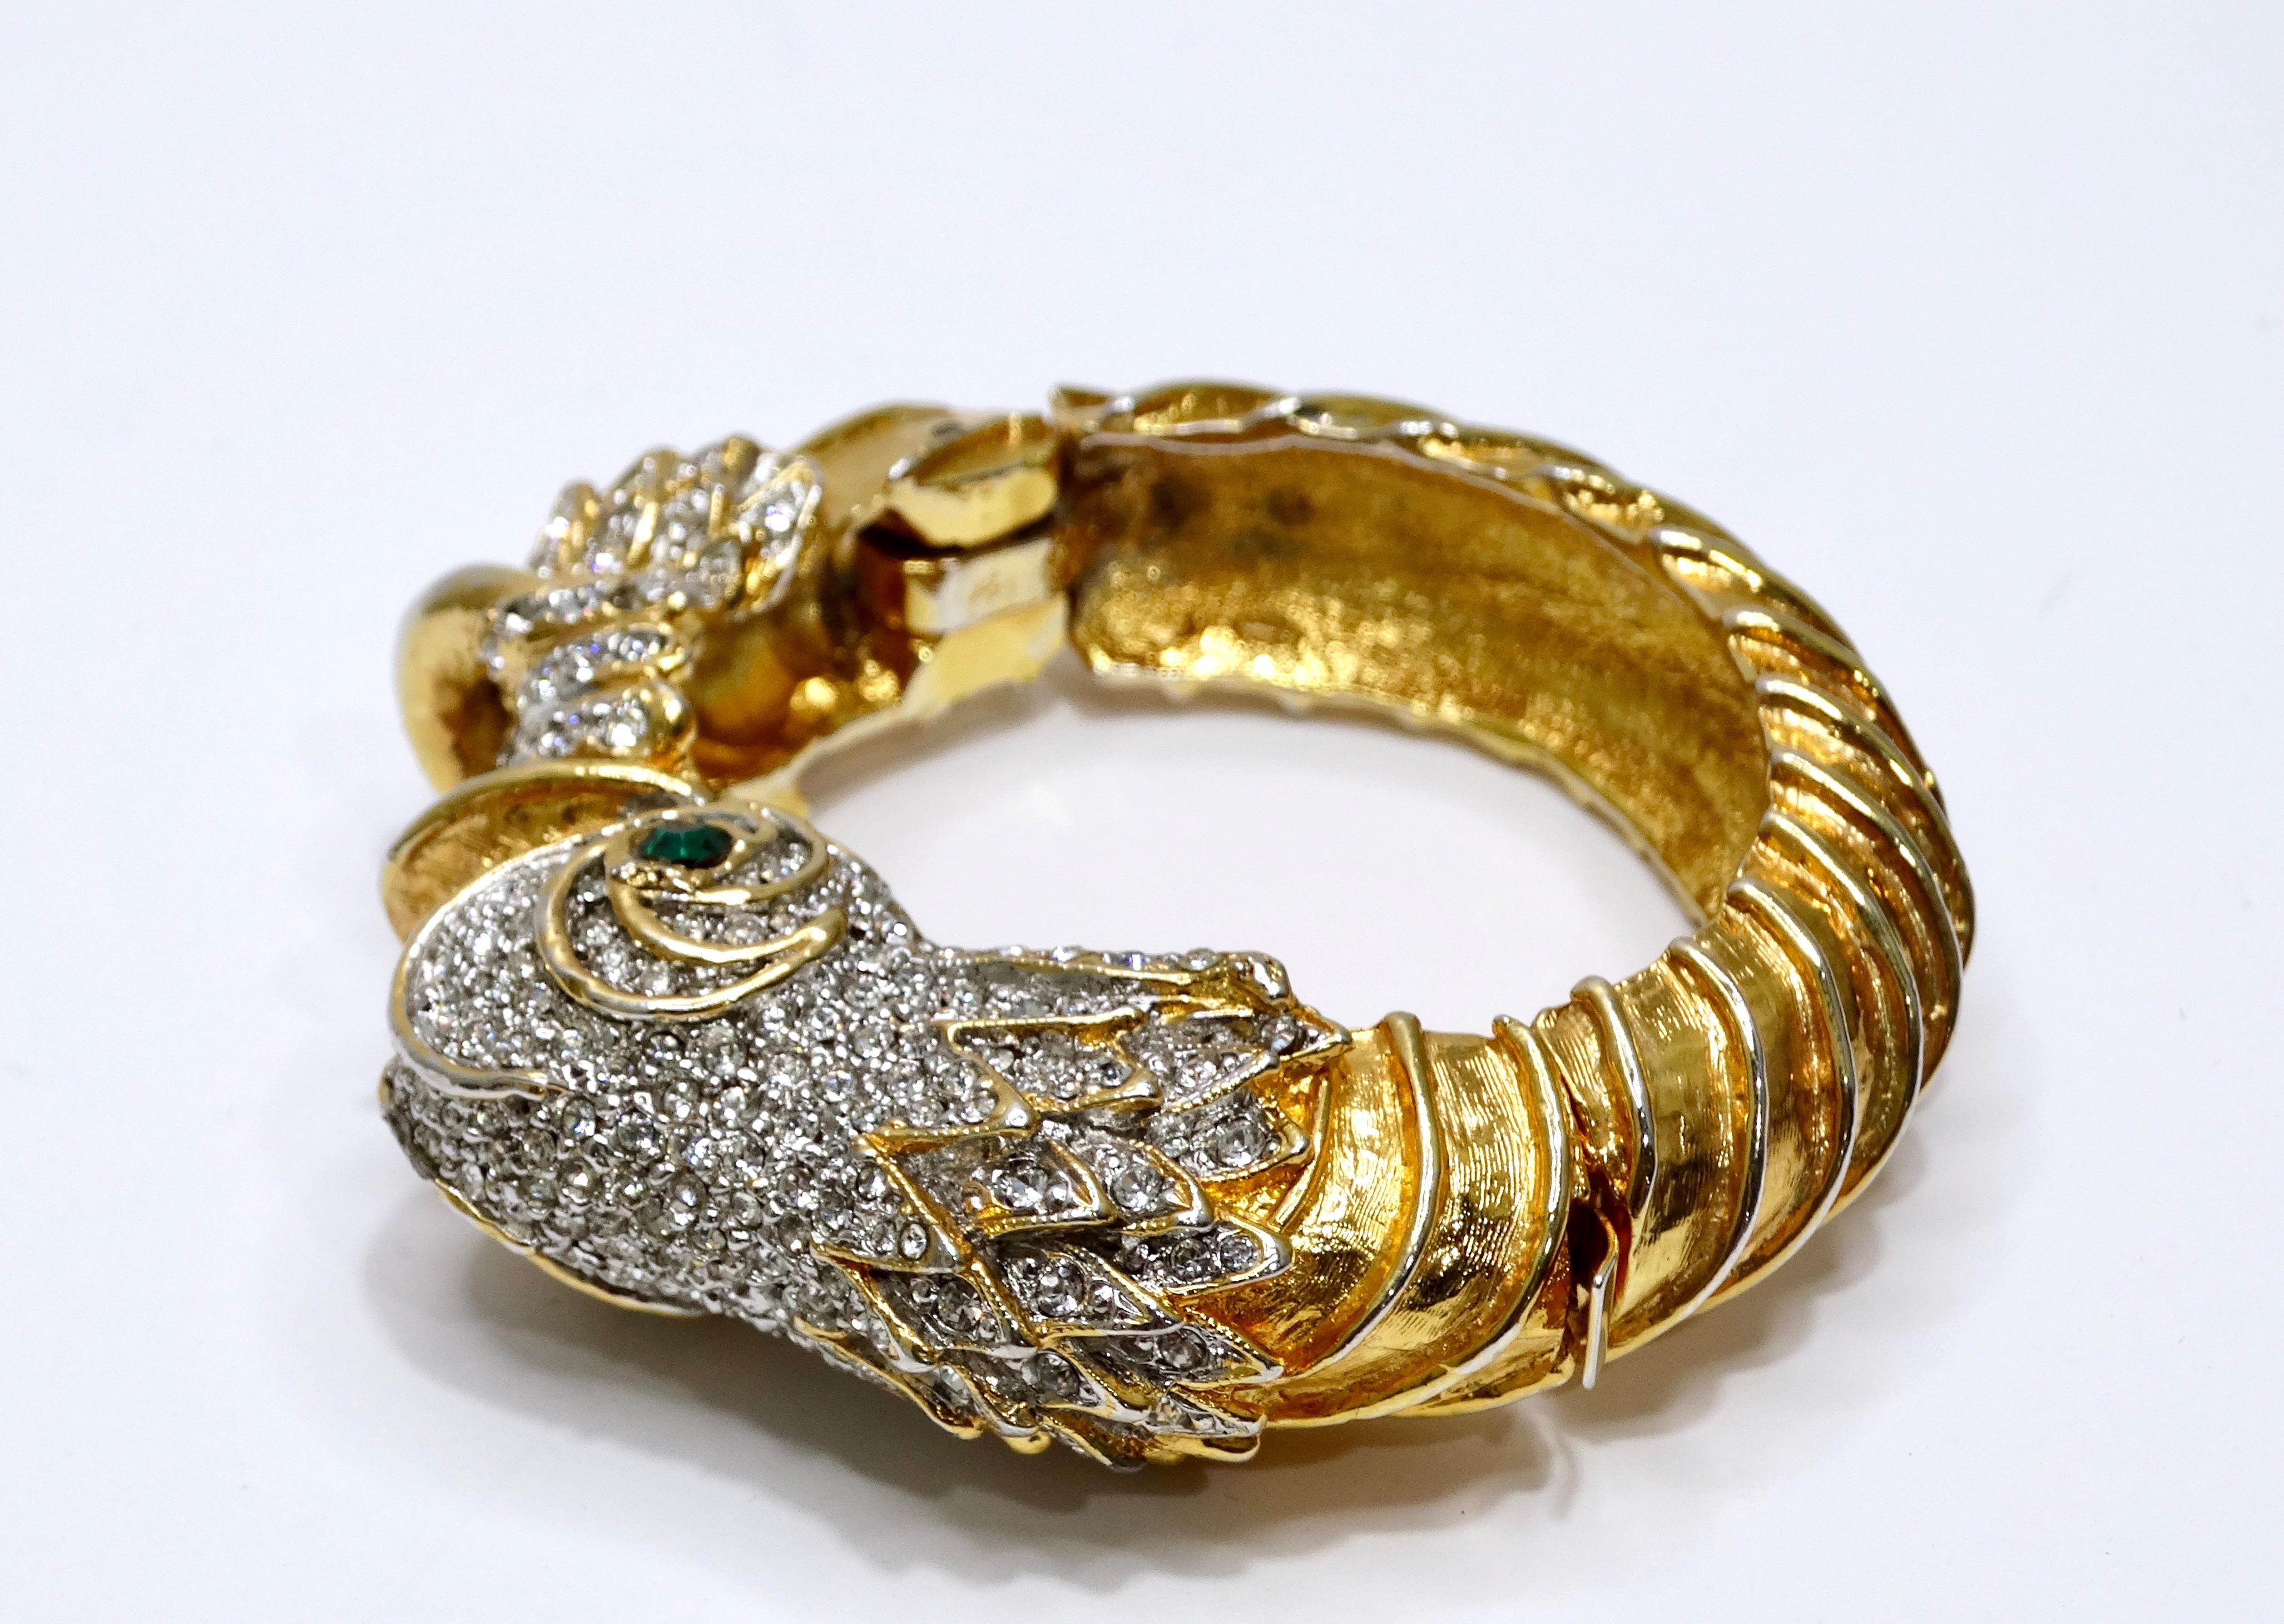 Kennth Lane is one of the most known jewelry designers in the United States and put intricate detail into this statement bracelet. Details feature a white and emerald green crystal embellished fish head, a highly textured band, and a clamp closure.